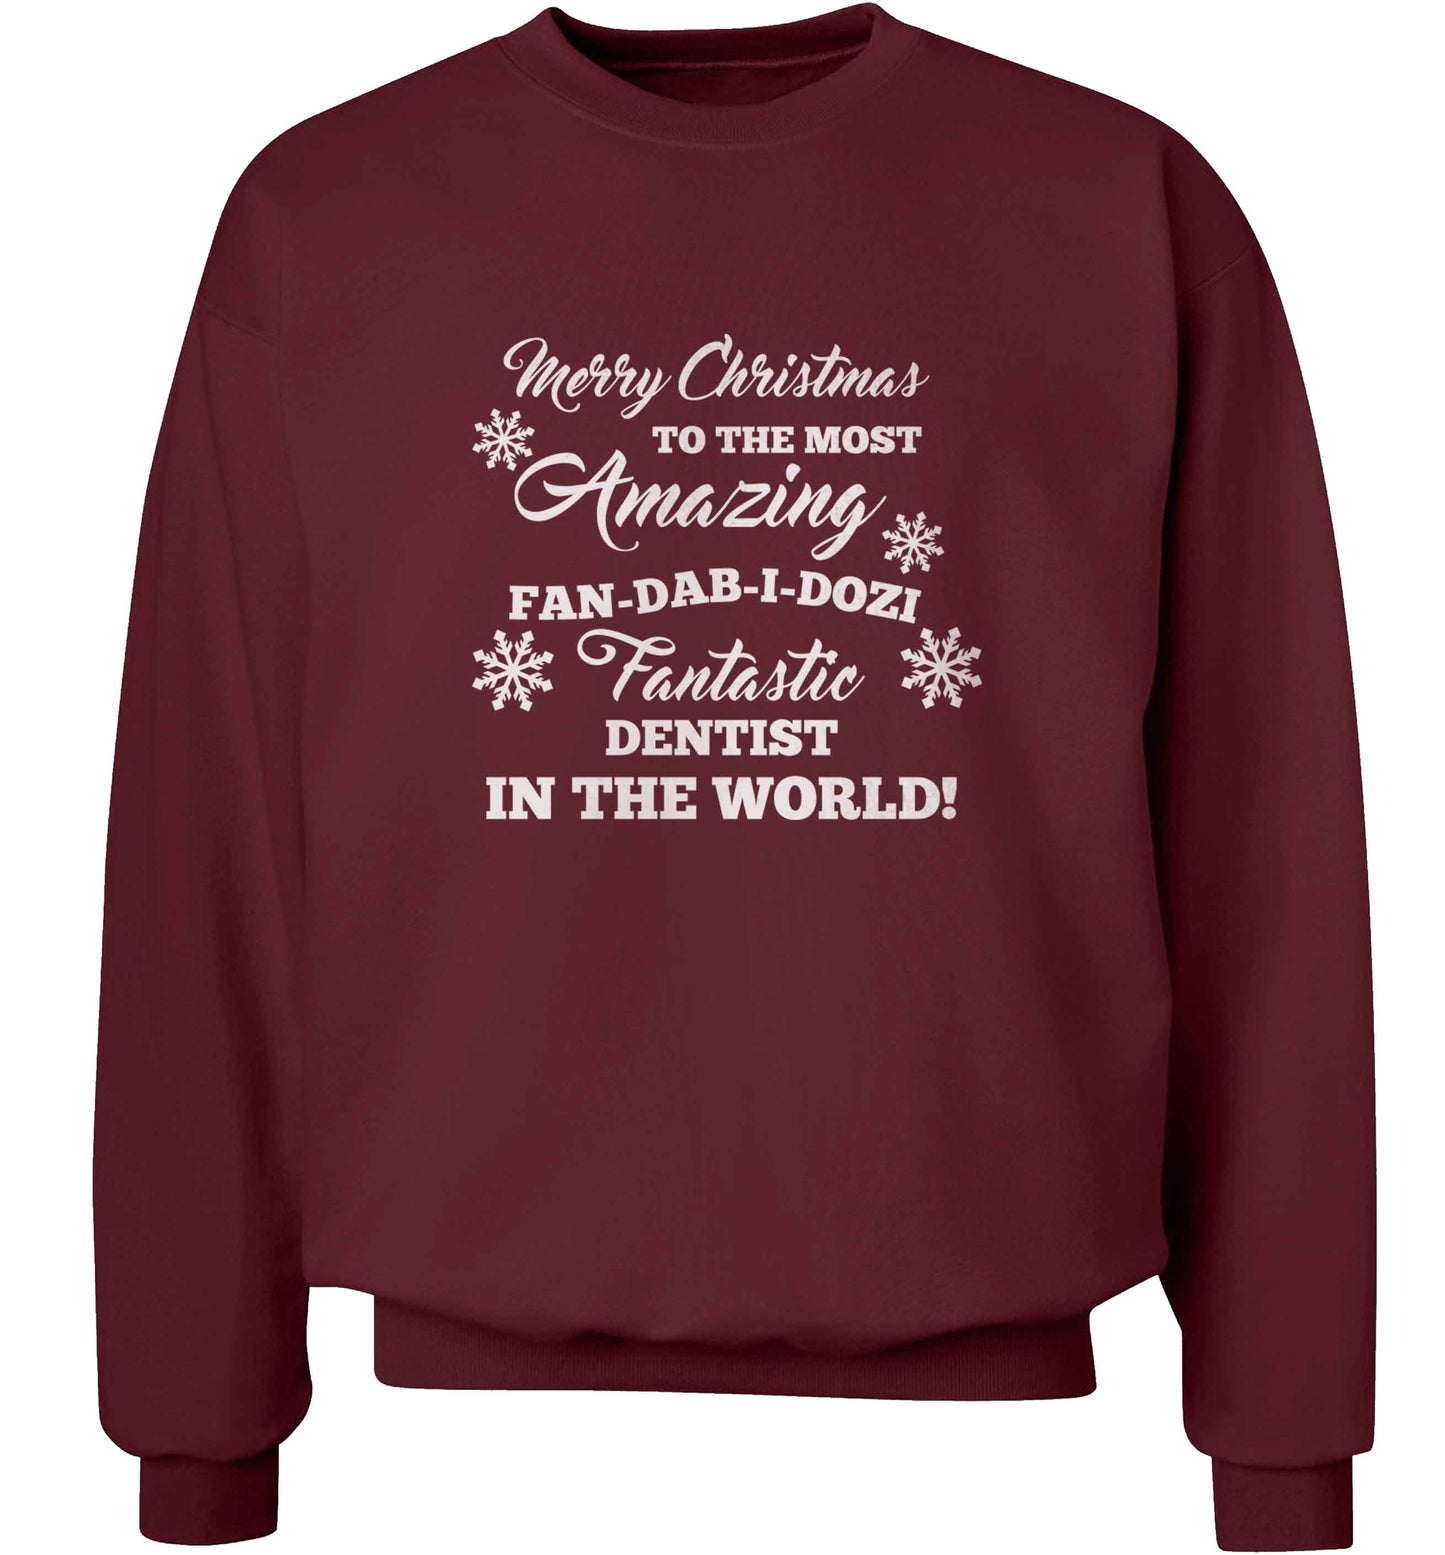 Merry Christmas to the most amazing dentist in the world! adult's unisex maroon sweater 2XL